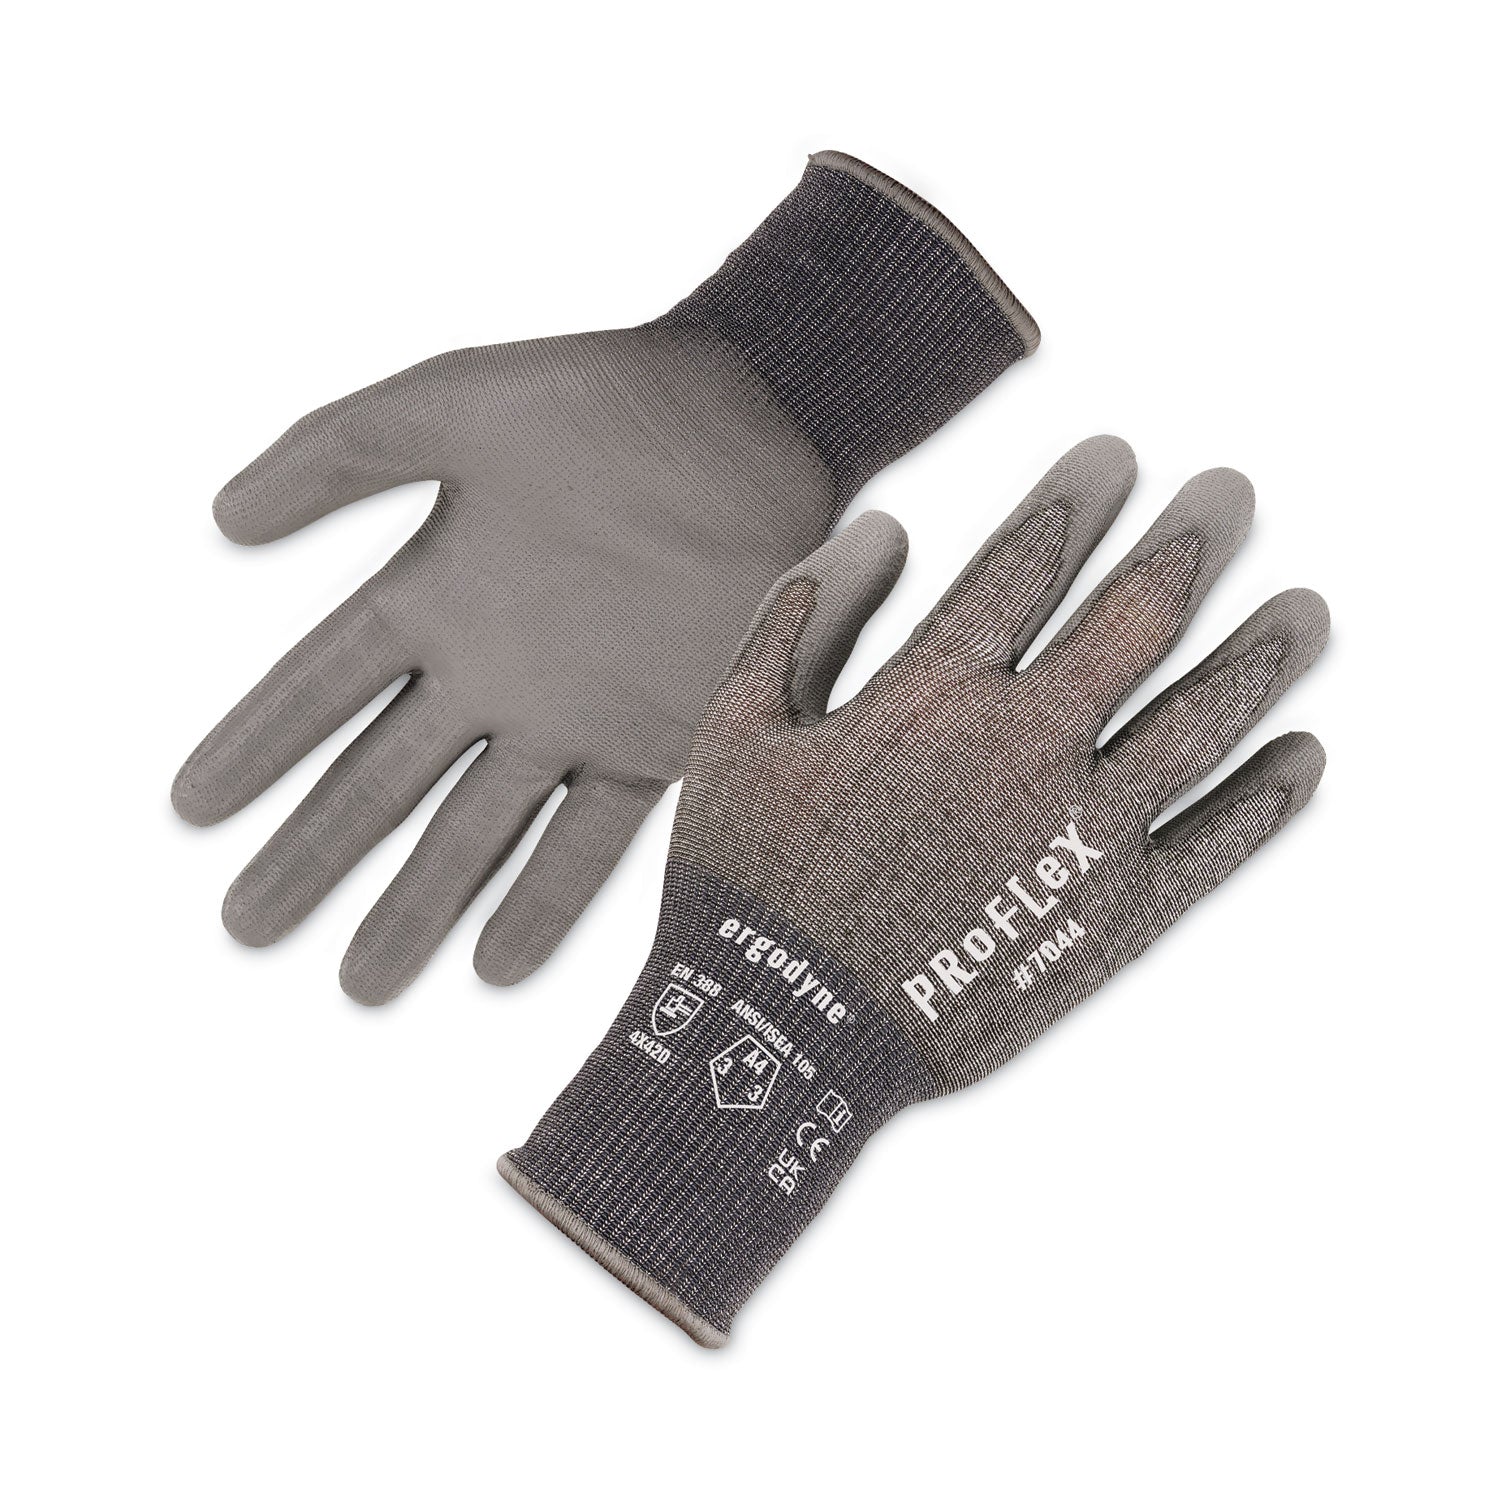 proflex-7044-ansi-a4-pu-coated-cr-gloves-gray-2x-large-12-pairs-pack-ships-in-1-3-business-days_ego10486 - 1